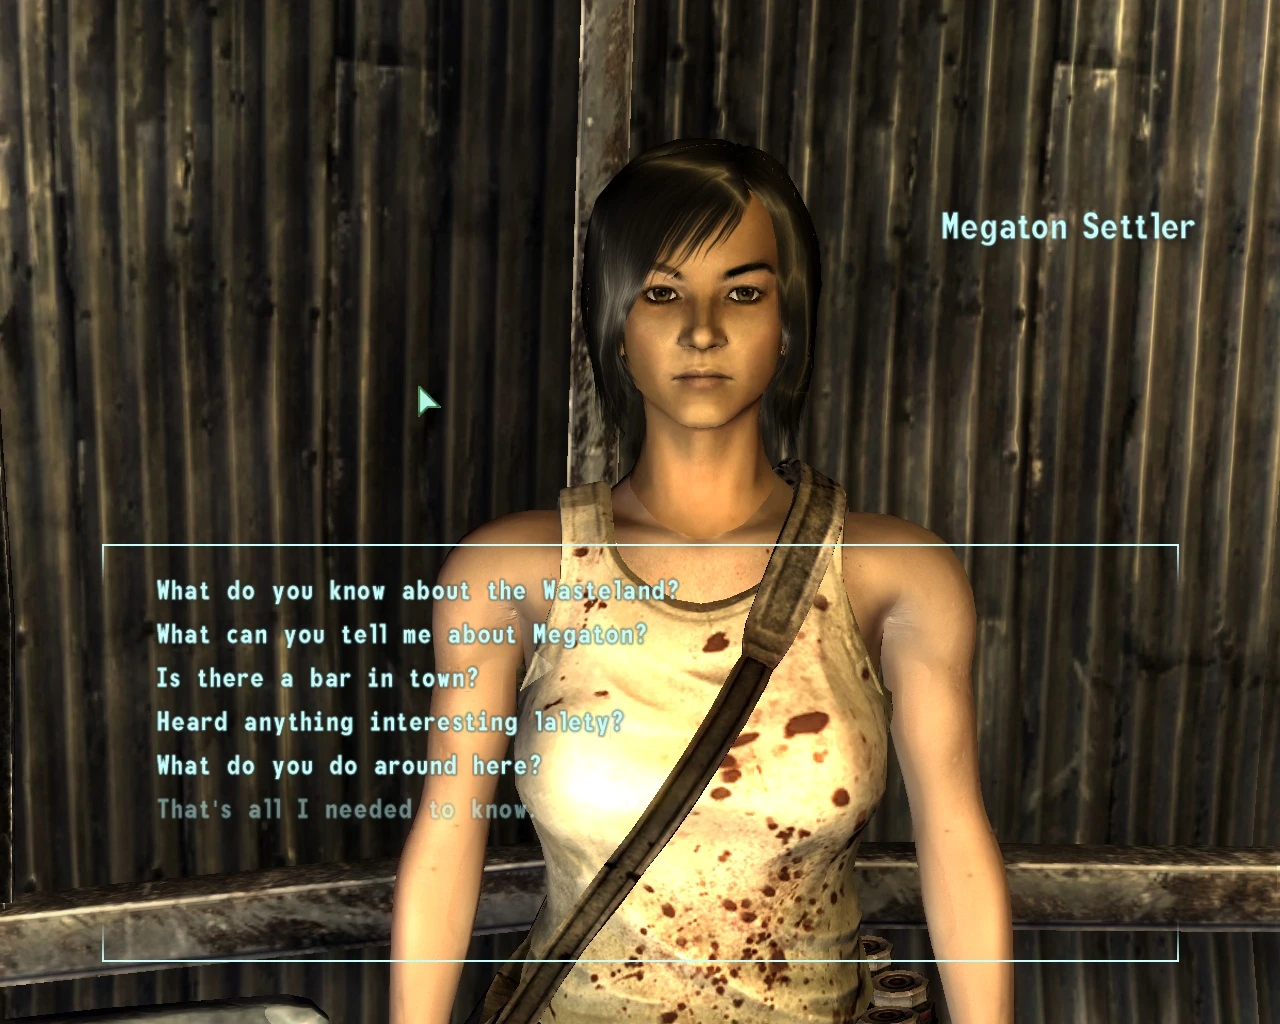 How To Install Fallout 3 Prostitution Mod Multiprogrameditor